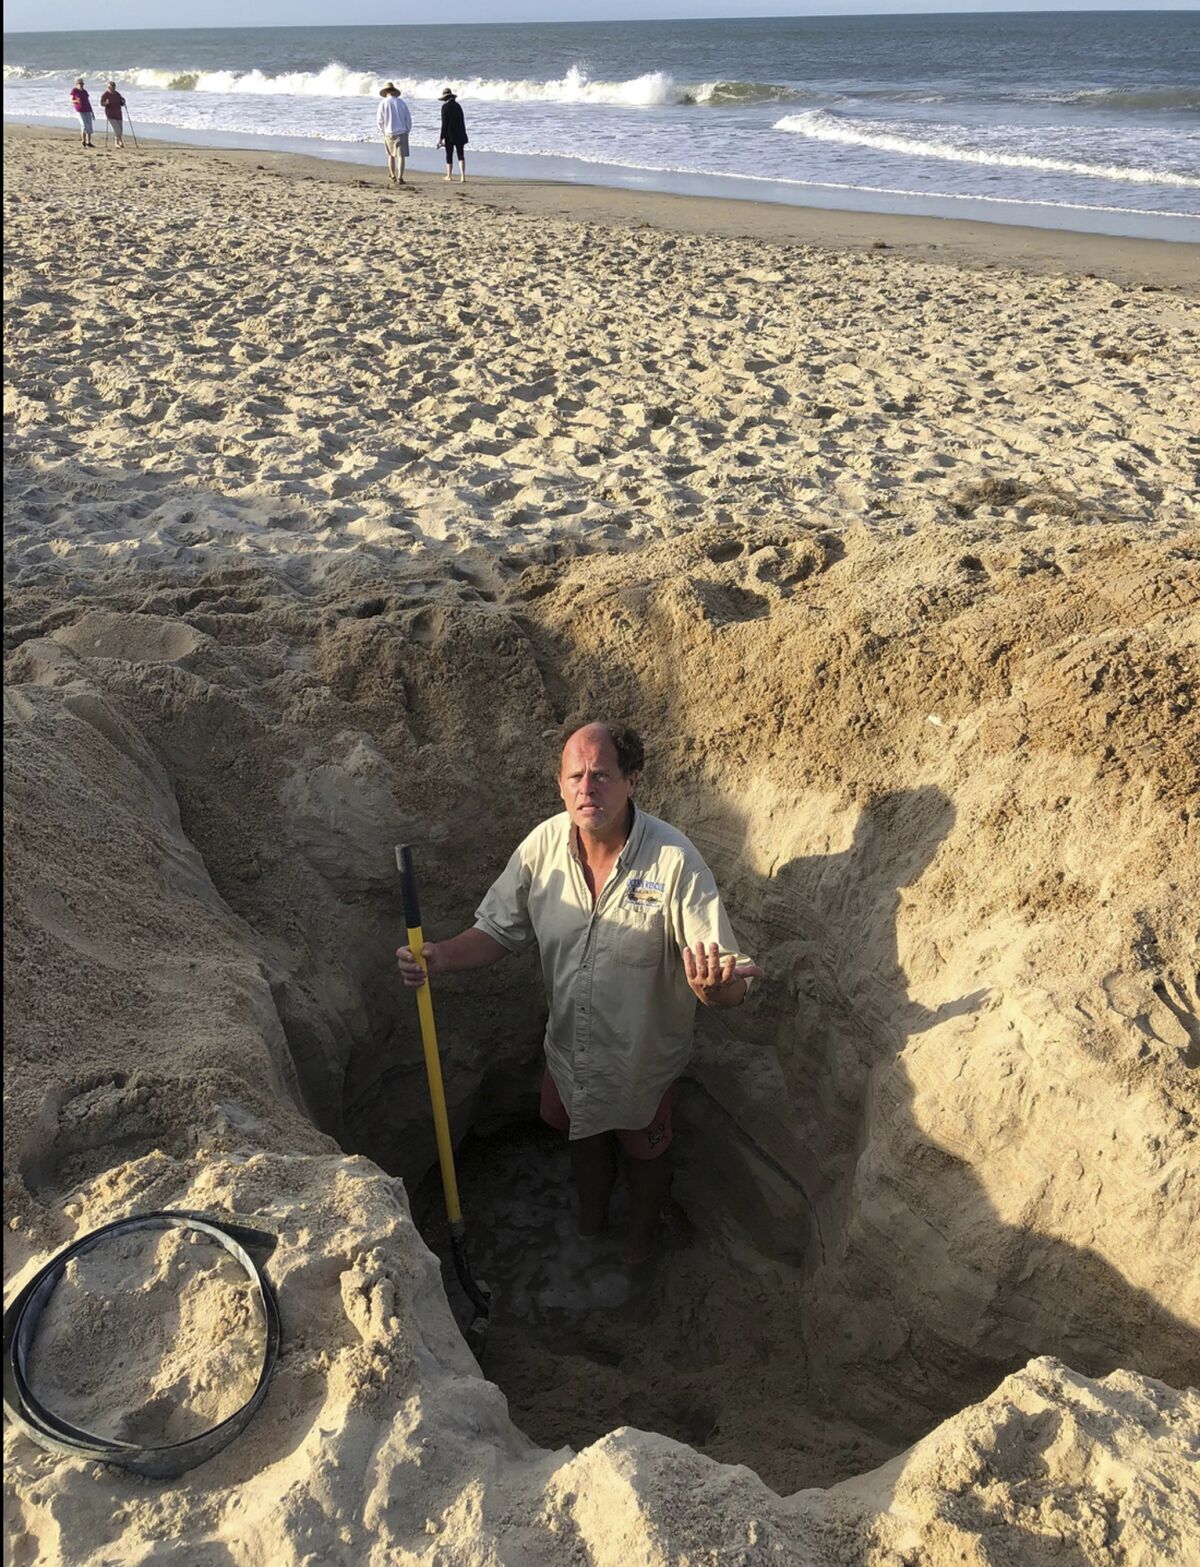 In this image provided by the Town of Kill Devil Hills, N.C., David Elder, ocean rescue supervisor for Kill Devil Hills, N.C, stands in a hole he estimates to be 7 feet deep on Sunday, May 15, 2022. The town on North Carolina’s Outer Banks has issued a plea to beachgoers about the dangers of digging holes on the beach and to cover them up to prevent problems. (Town of Kill Devil Hills via AP)